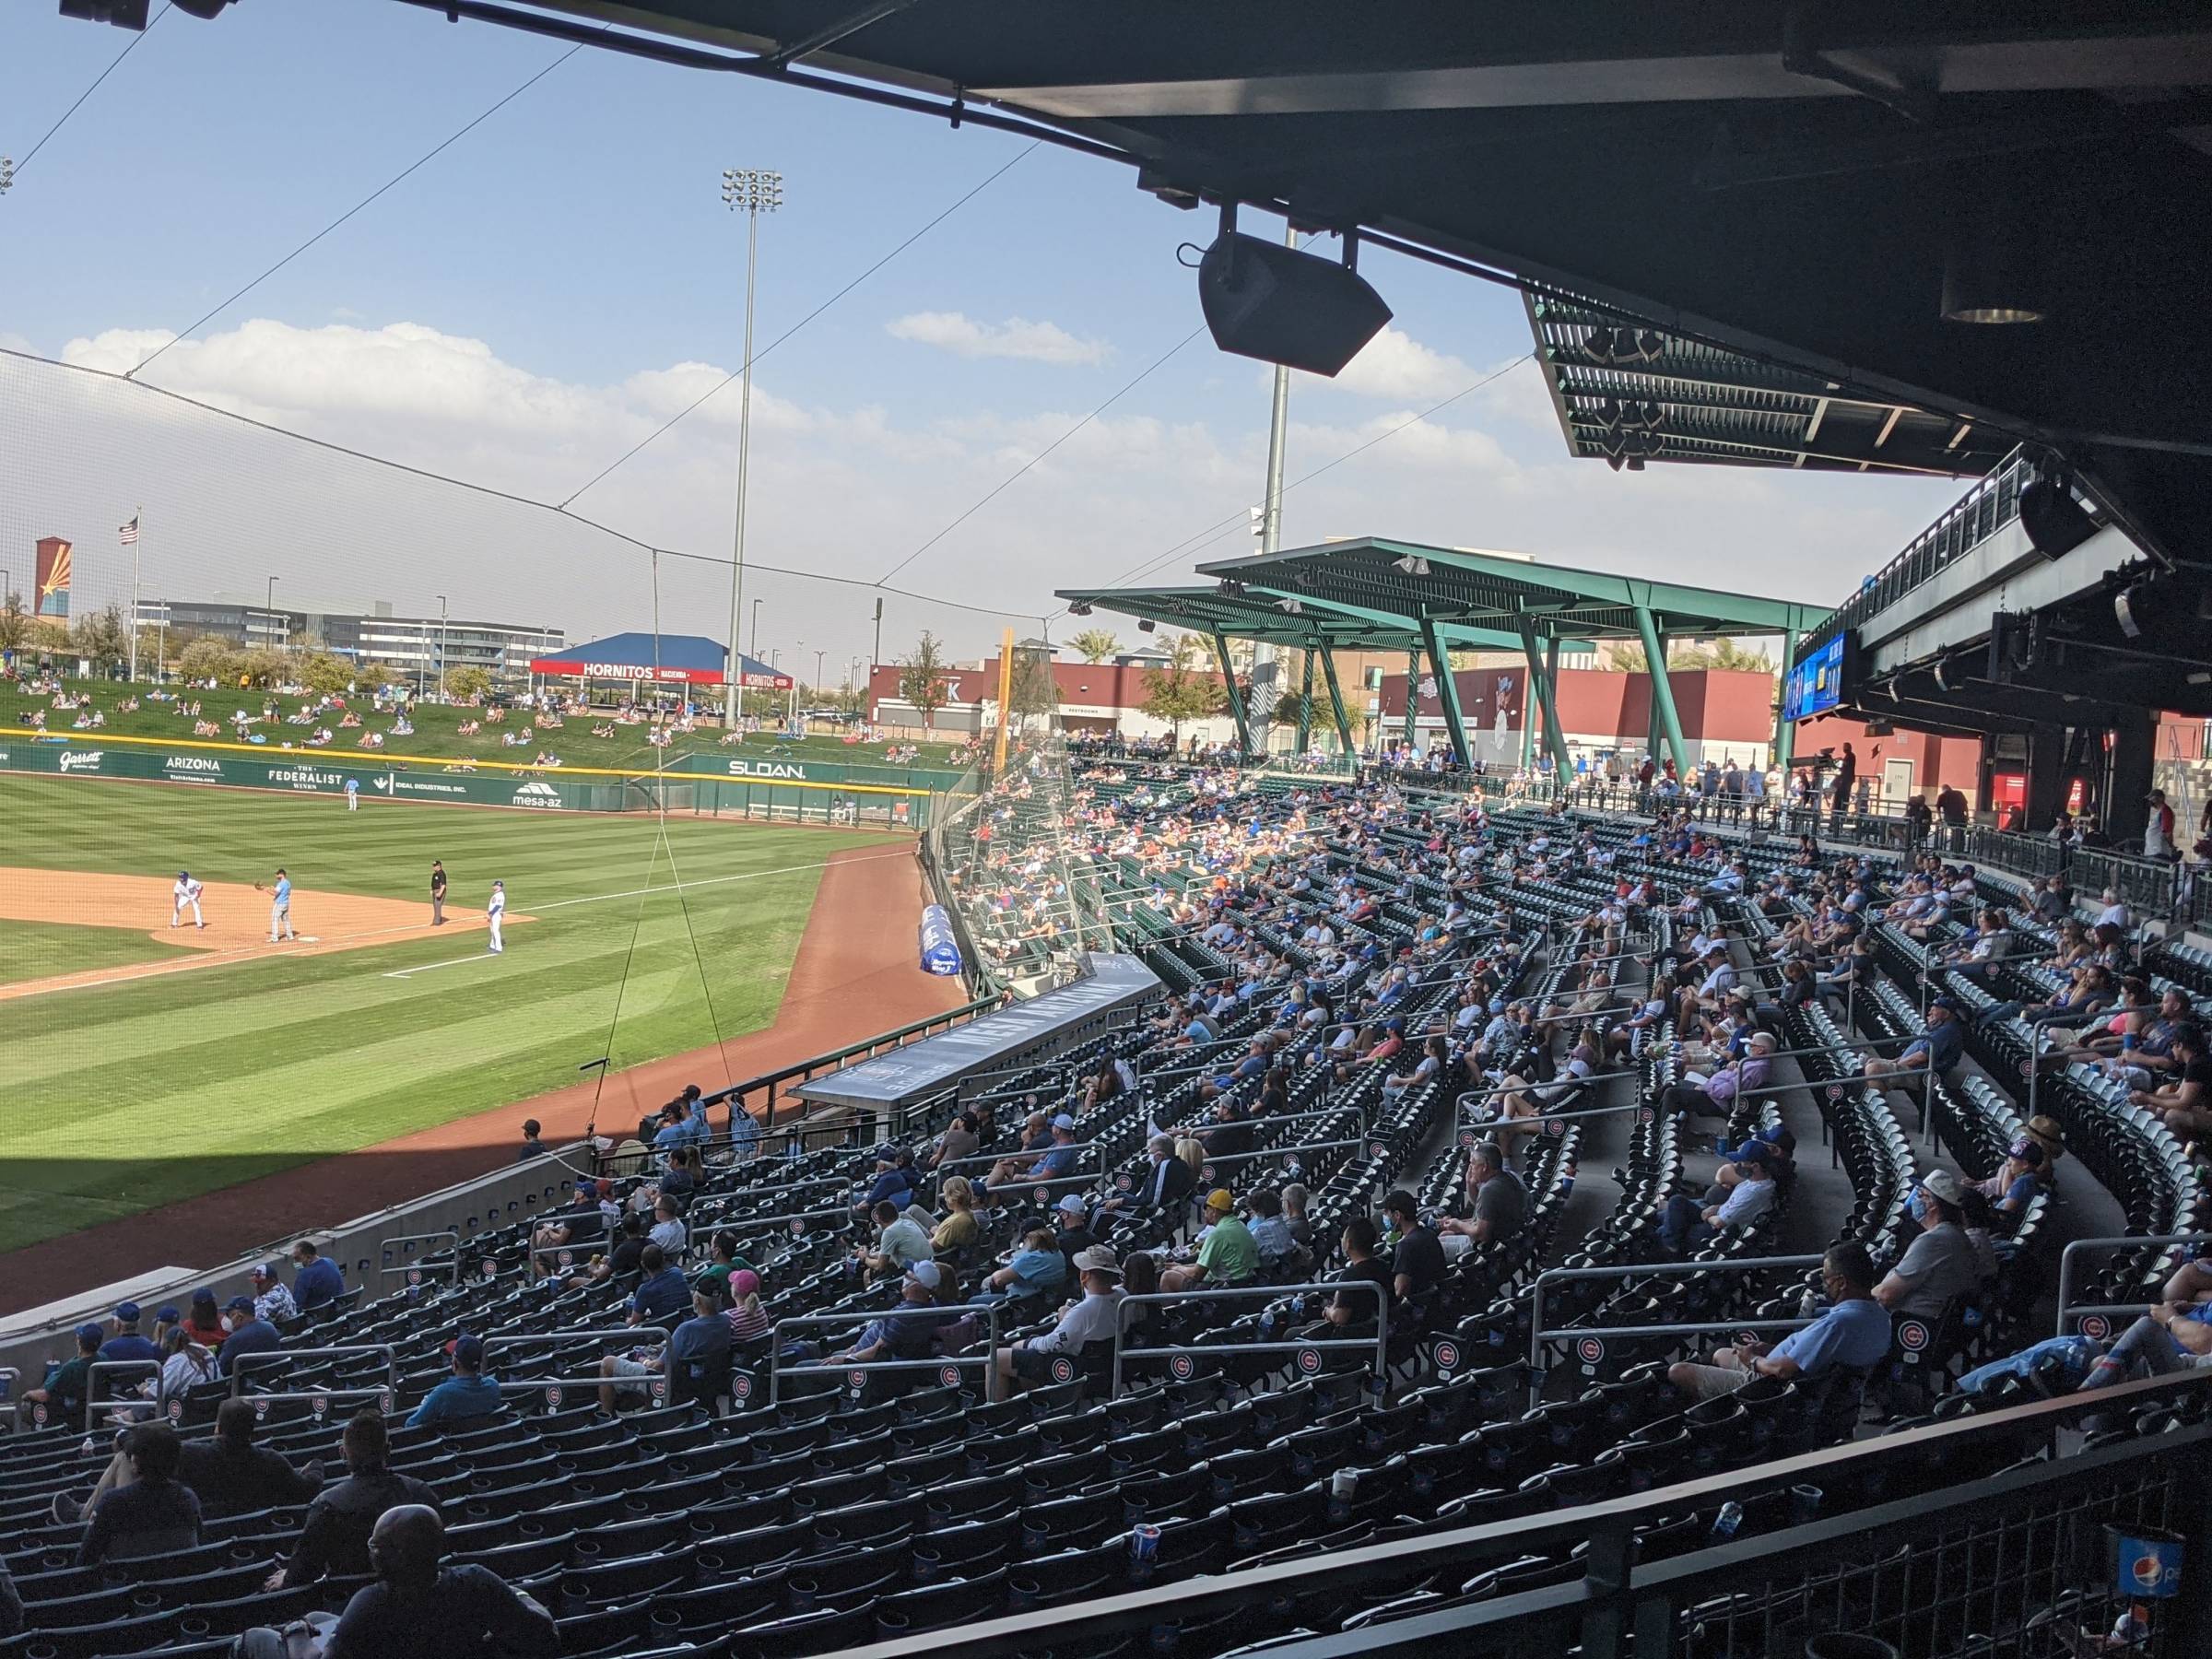 Section 116 at Sloan Park 